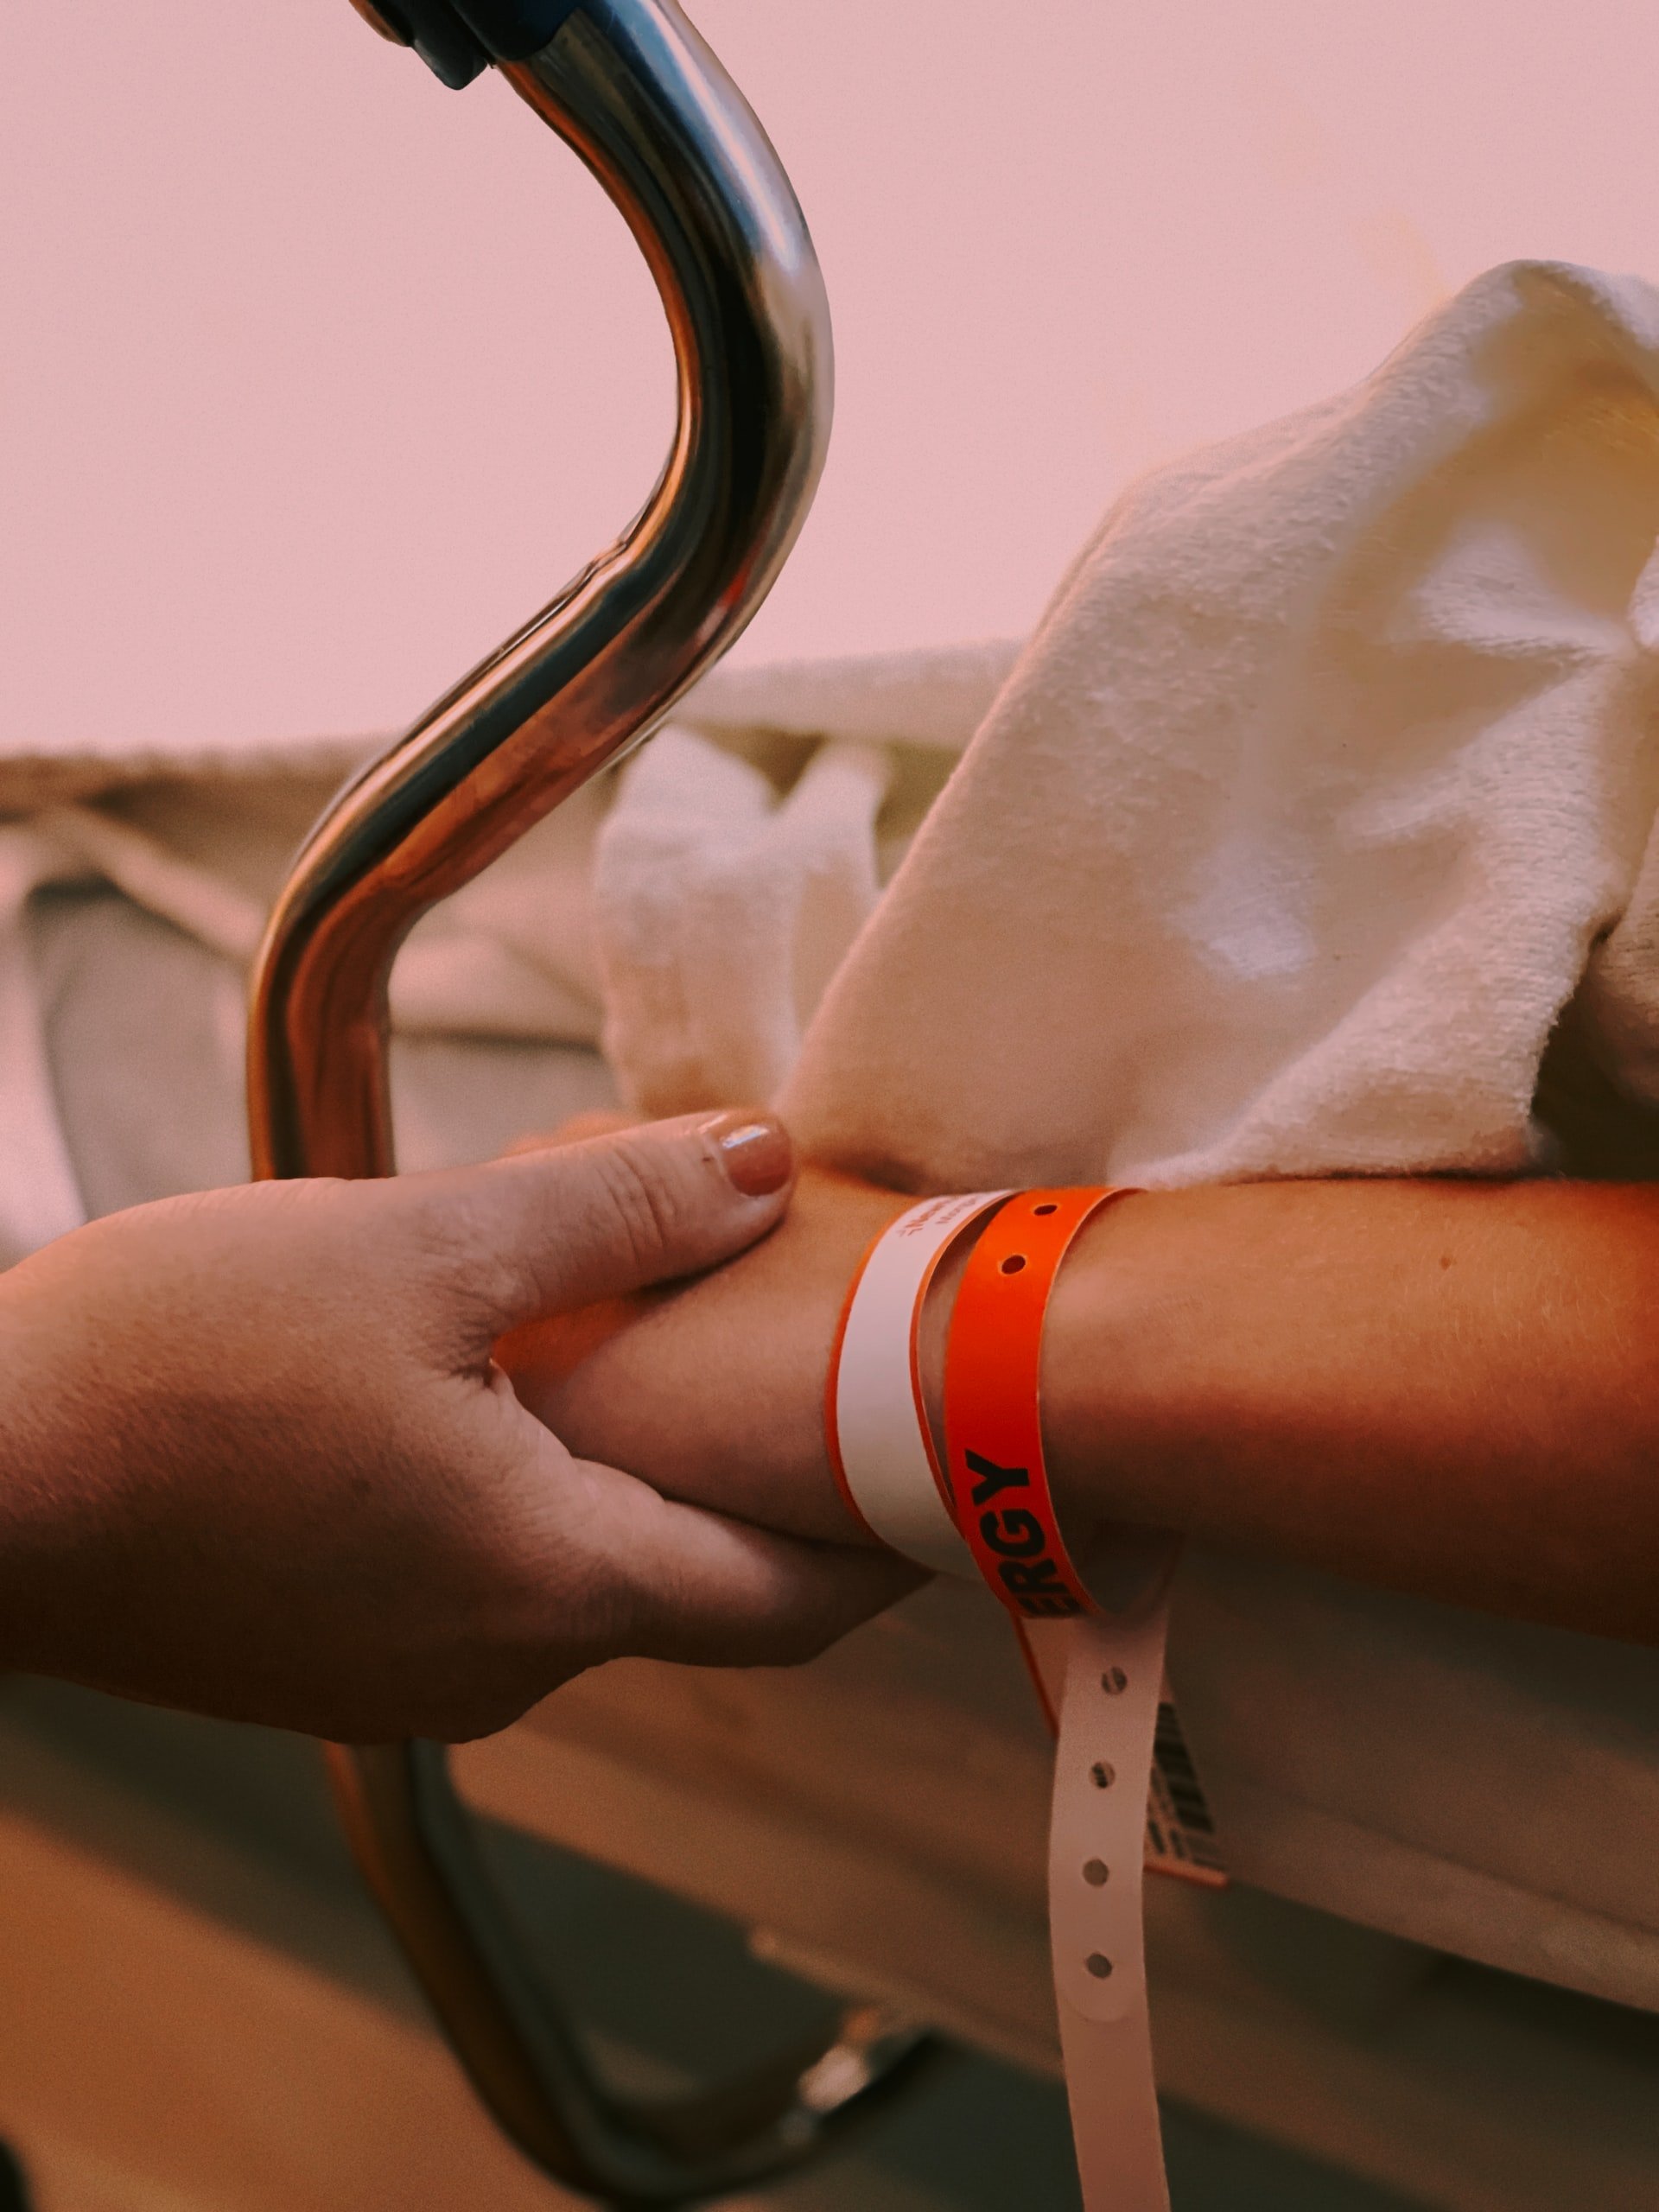 Those days at the hospital changed everything for Jonathan. | Source: Unsplash